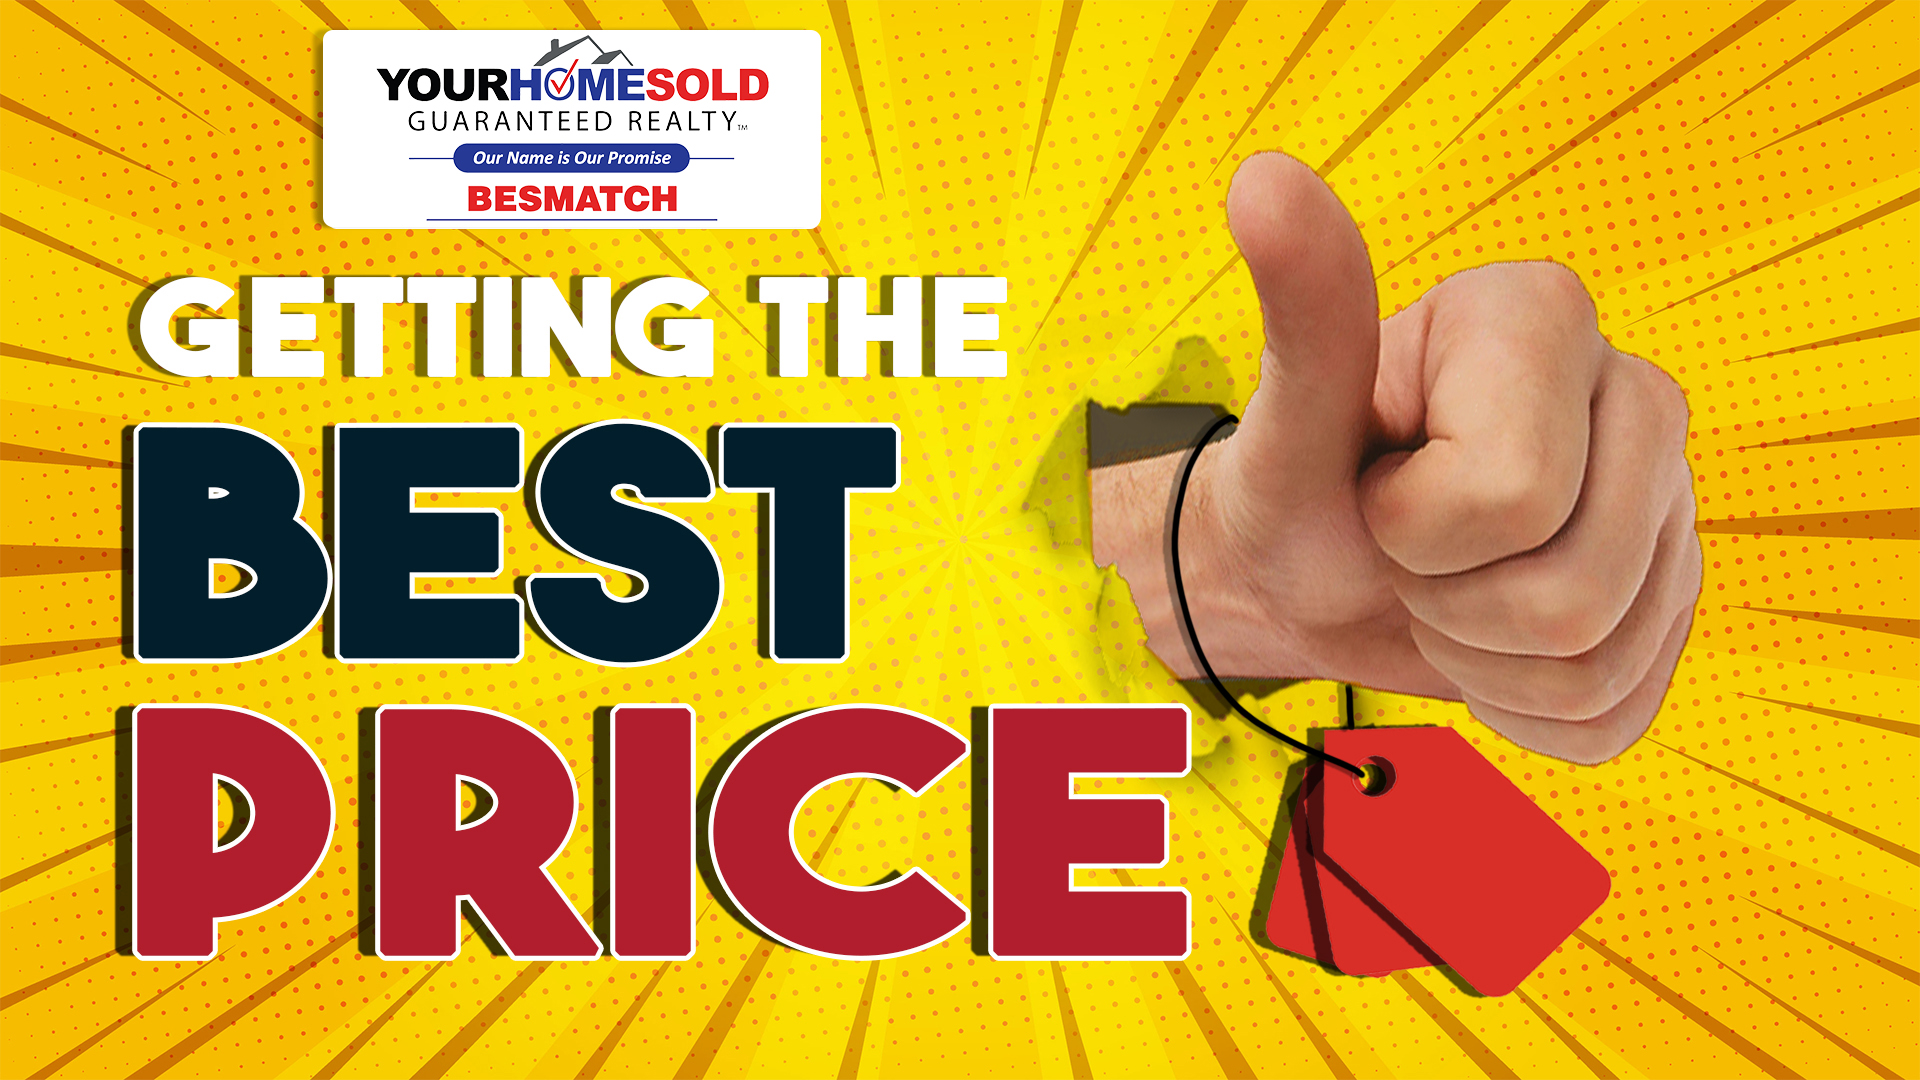 Get the Highest Price You can When You Sell Your Home